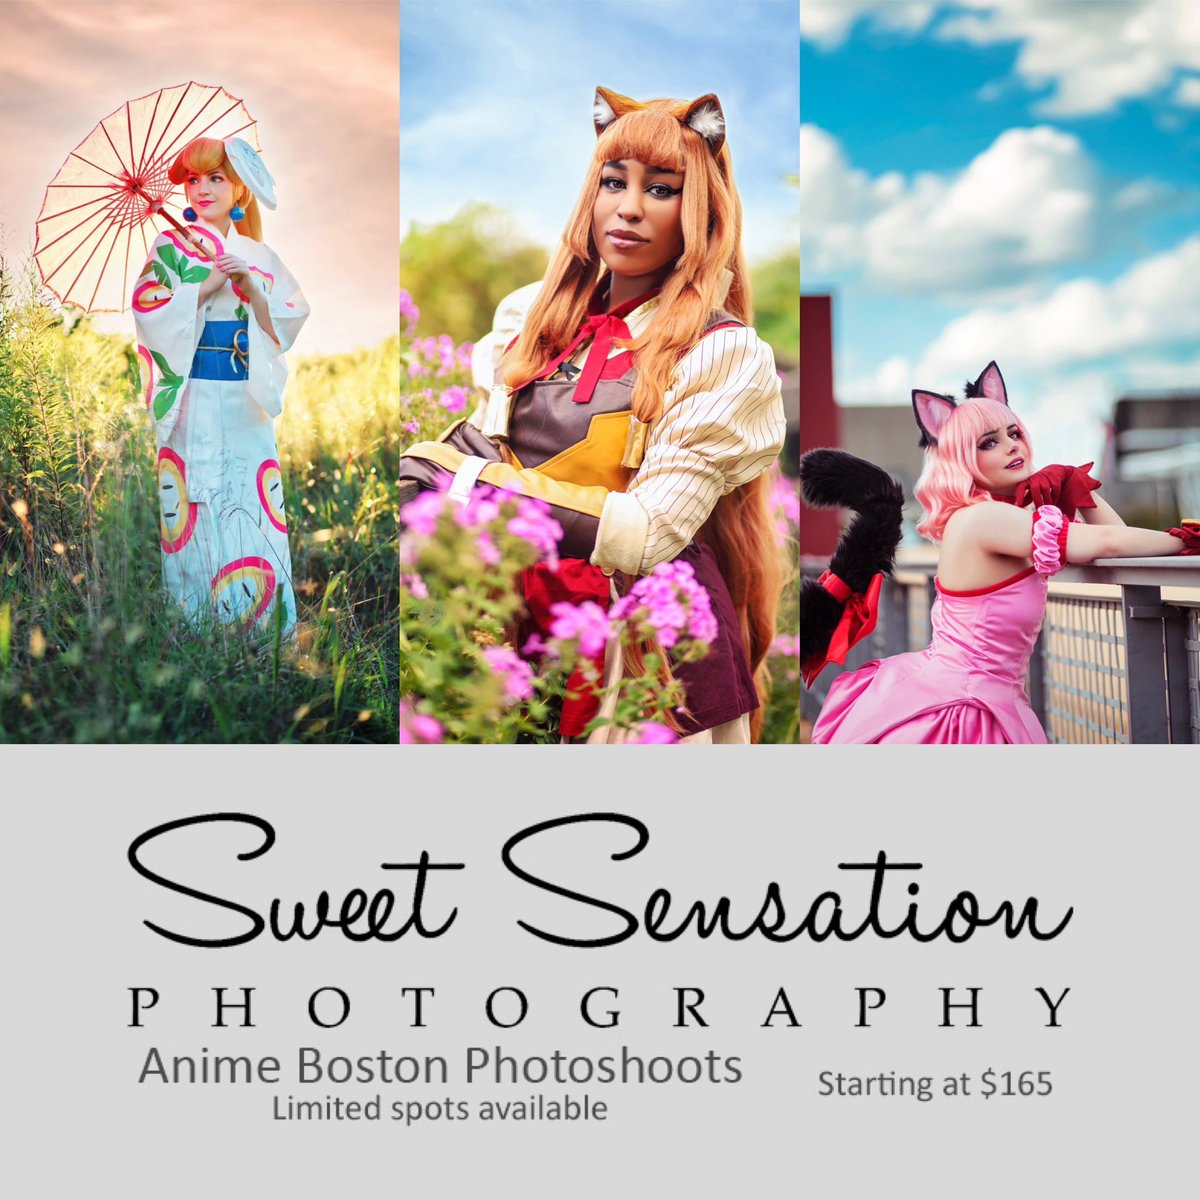 Hey all! I’m heading to Anime Boston. Let’s work together. :)

#animeboston #animeboston2023 #animeboston2022 #animebostoncosplay #bostoncosplay #bostoncosplayer